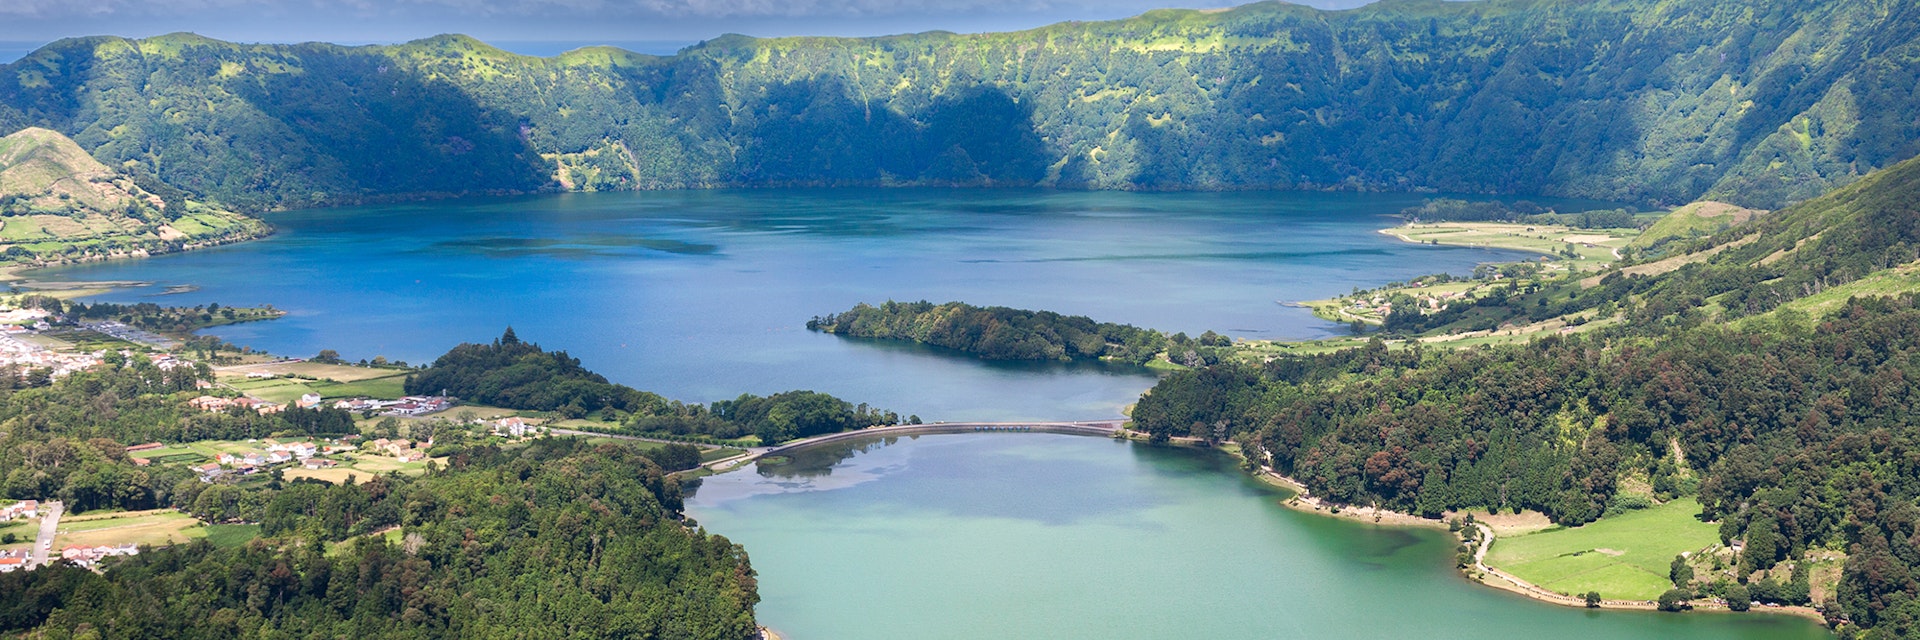 Lake of Sete Cidades from Vista do Rei viewpoint in Sao Miguel, Azores; Shutterstock ID 333806120; Your name (First / Last): James Kay; GL account no.: 65050; Netsuite department name: Online Editorial; Full Product or Project name including edition: Azores destination page highlights